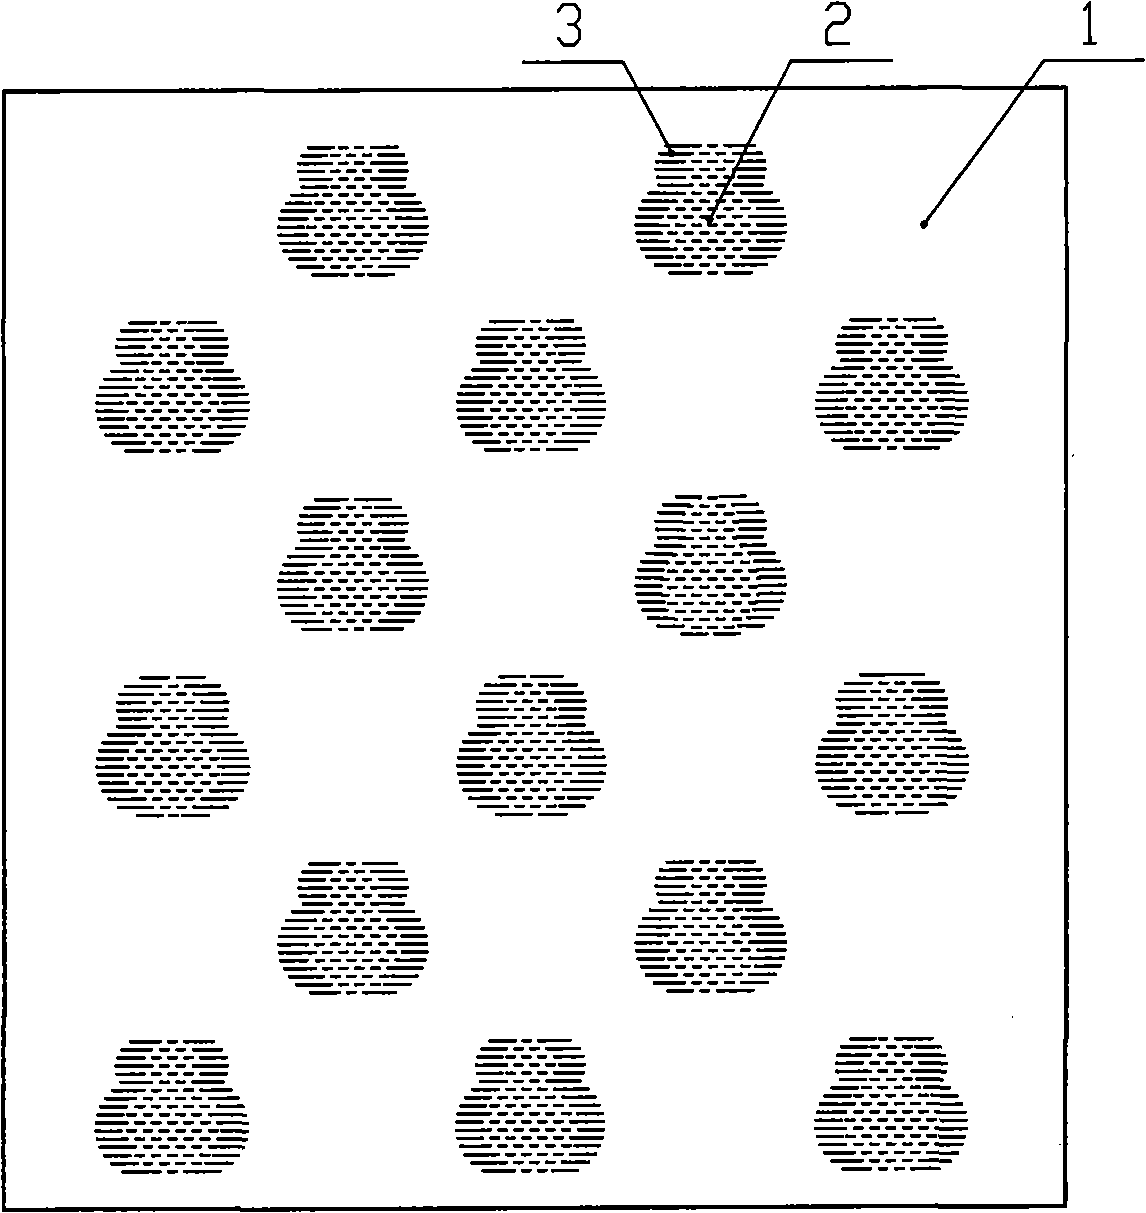 Cutting motif fabric and method of manufacture